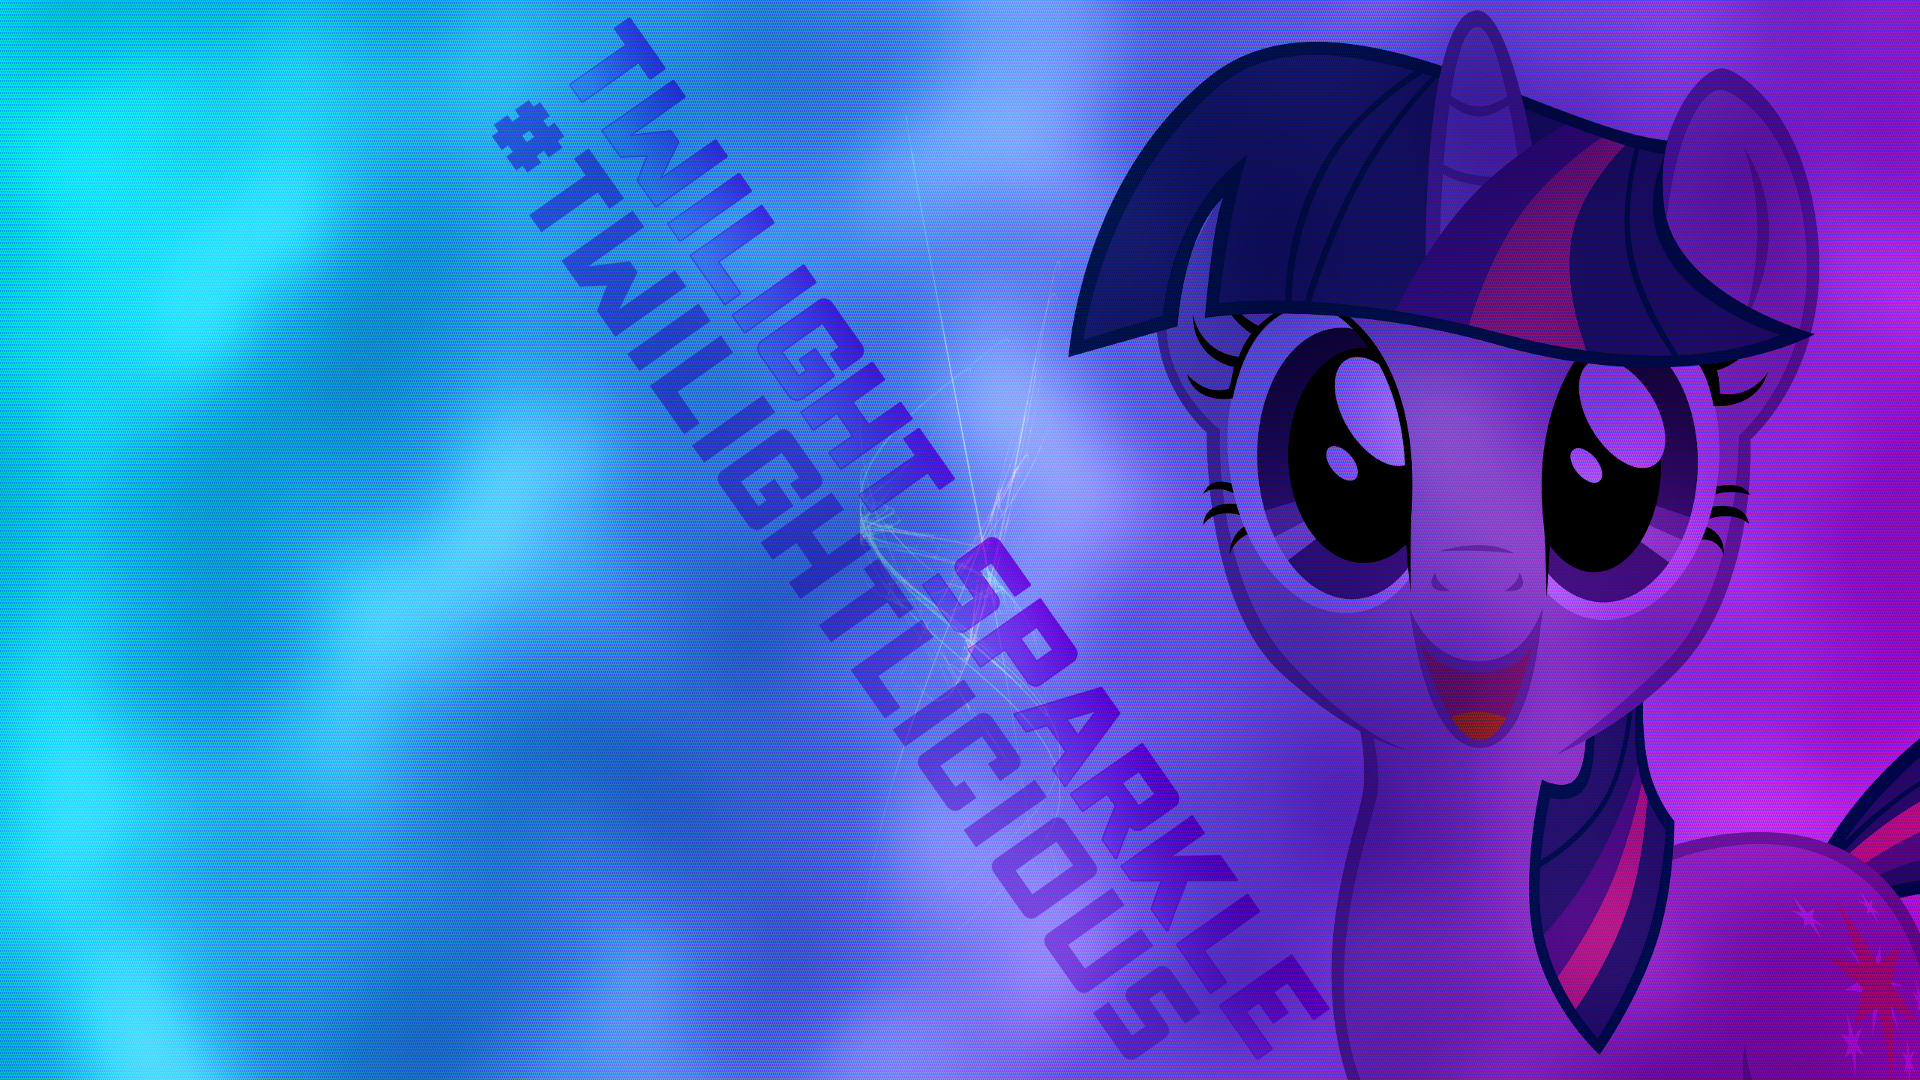 #Twilightlicious wallpaper by iCammo